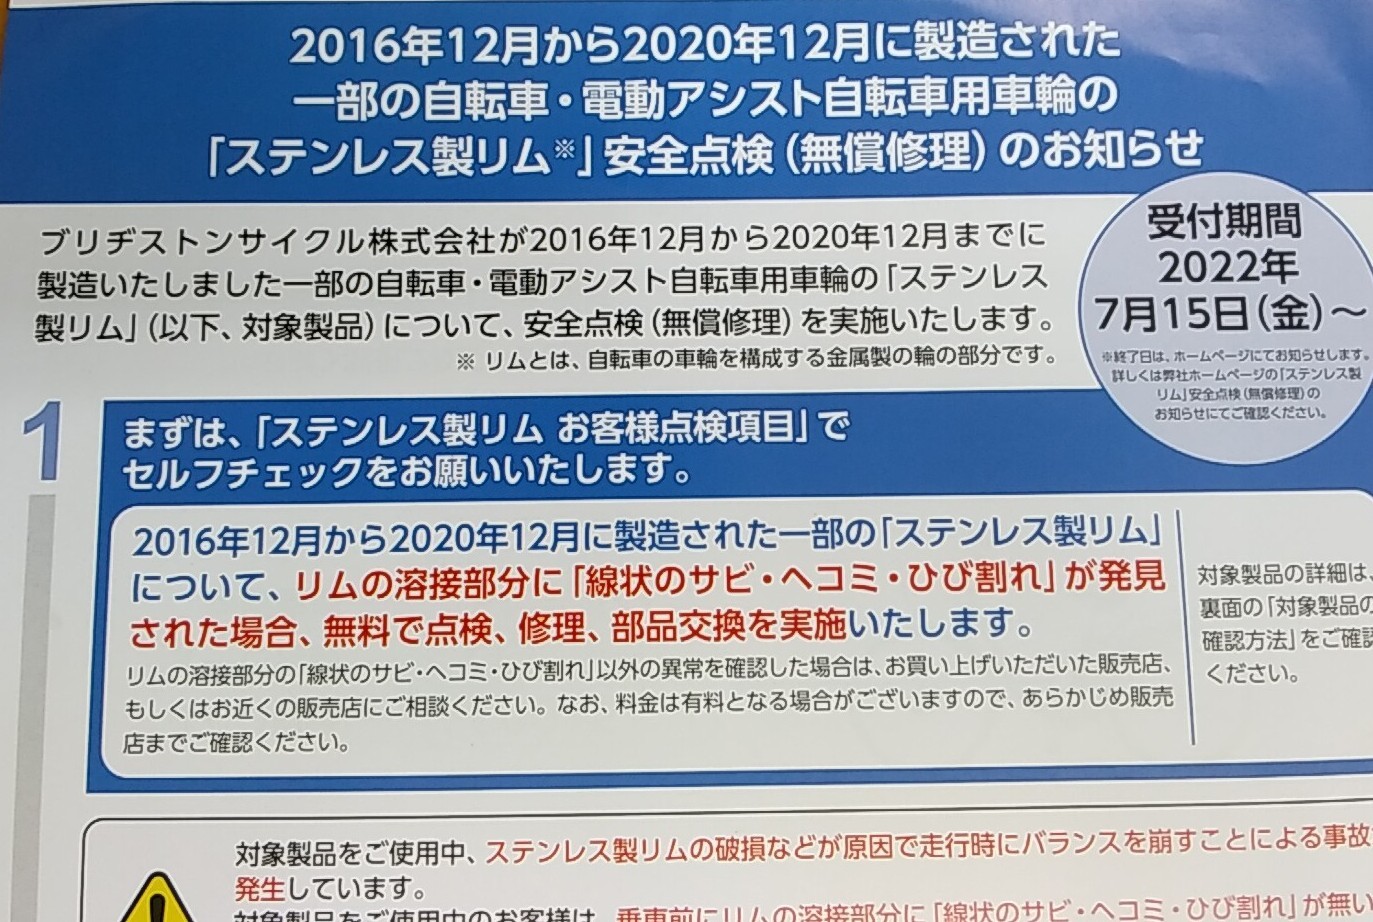 2022BSリム割れチラシ